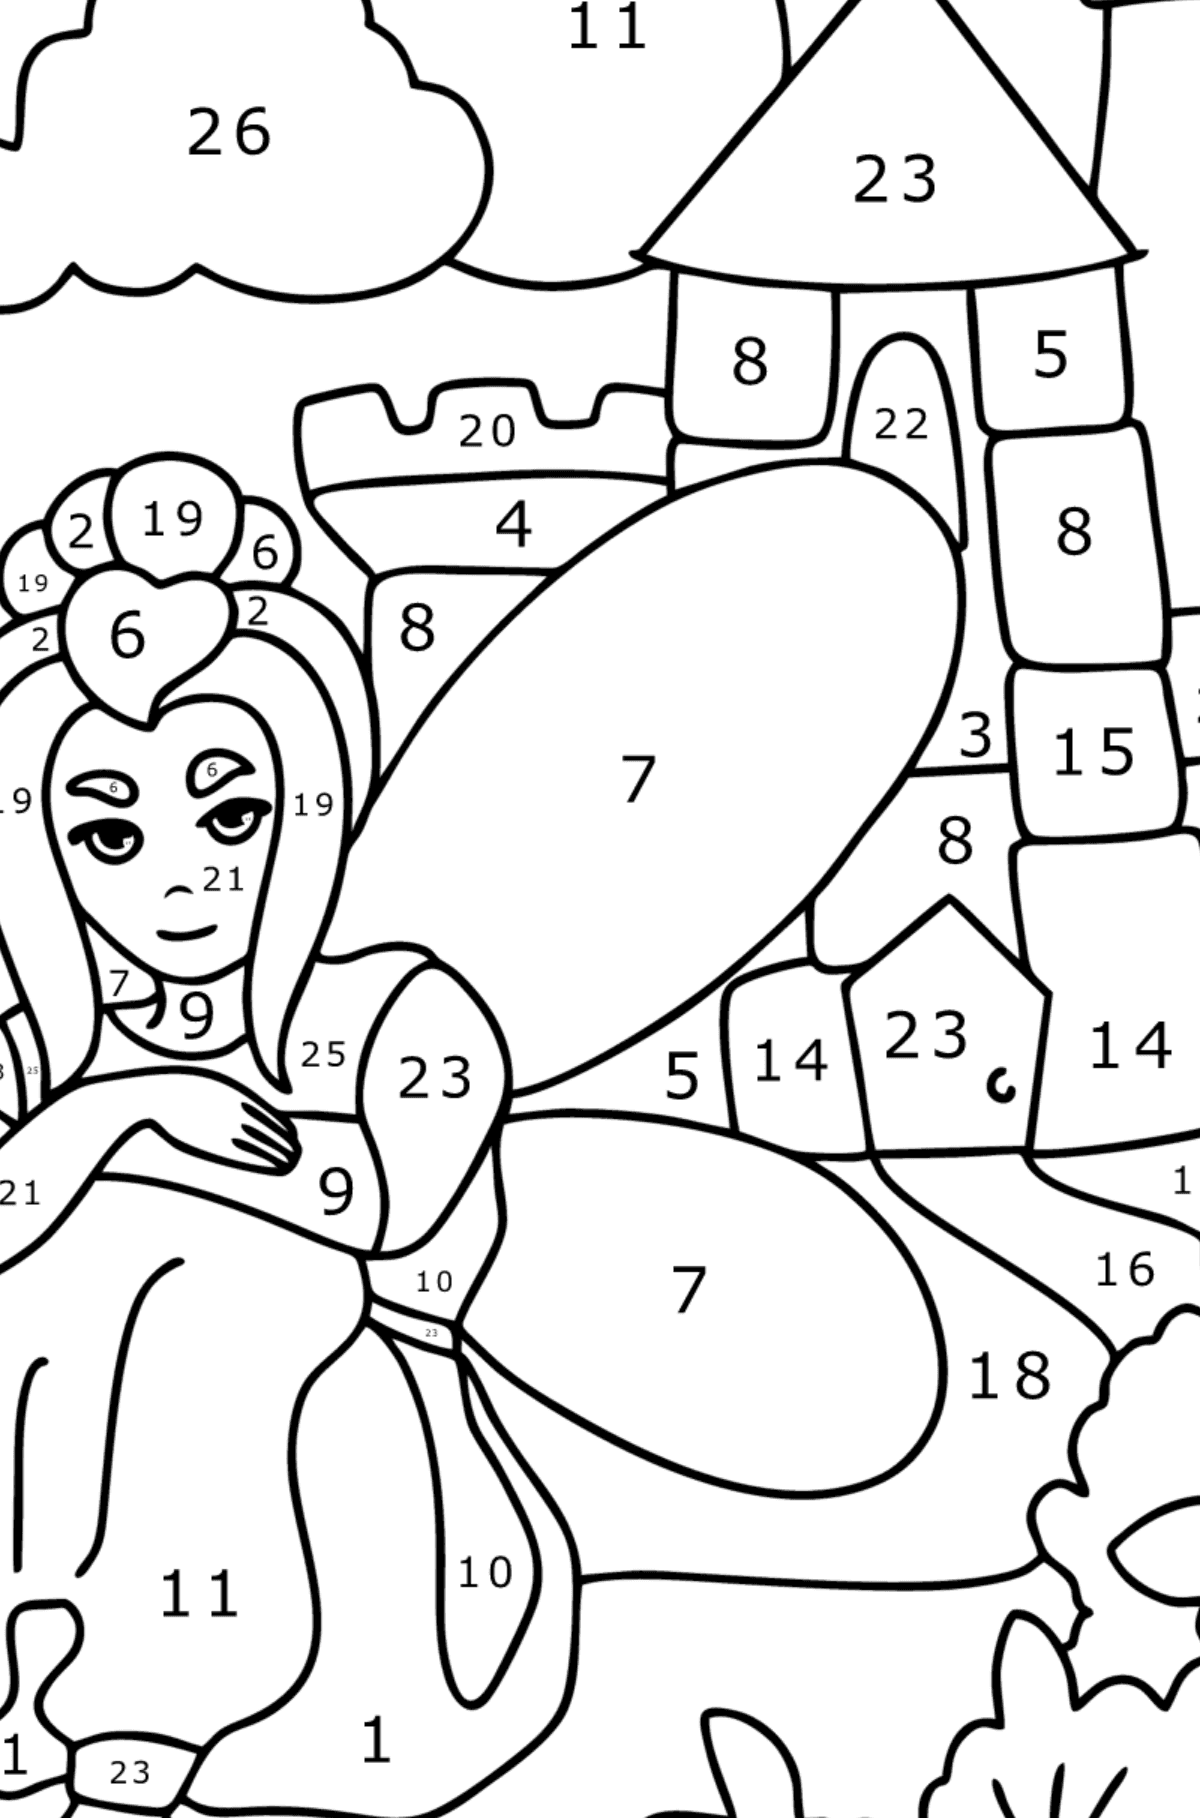 Fairy at the castle coloring page - Coloring by Numbers for Kids